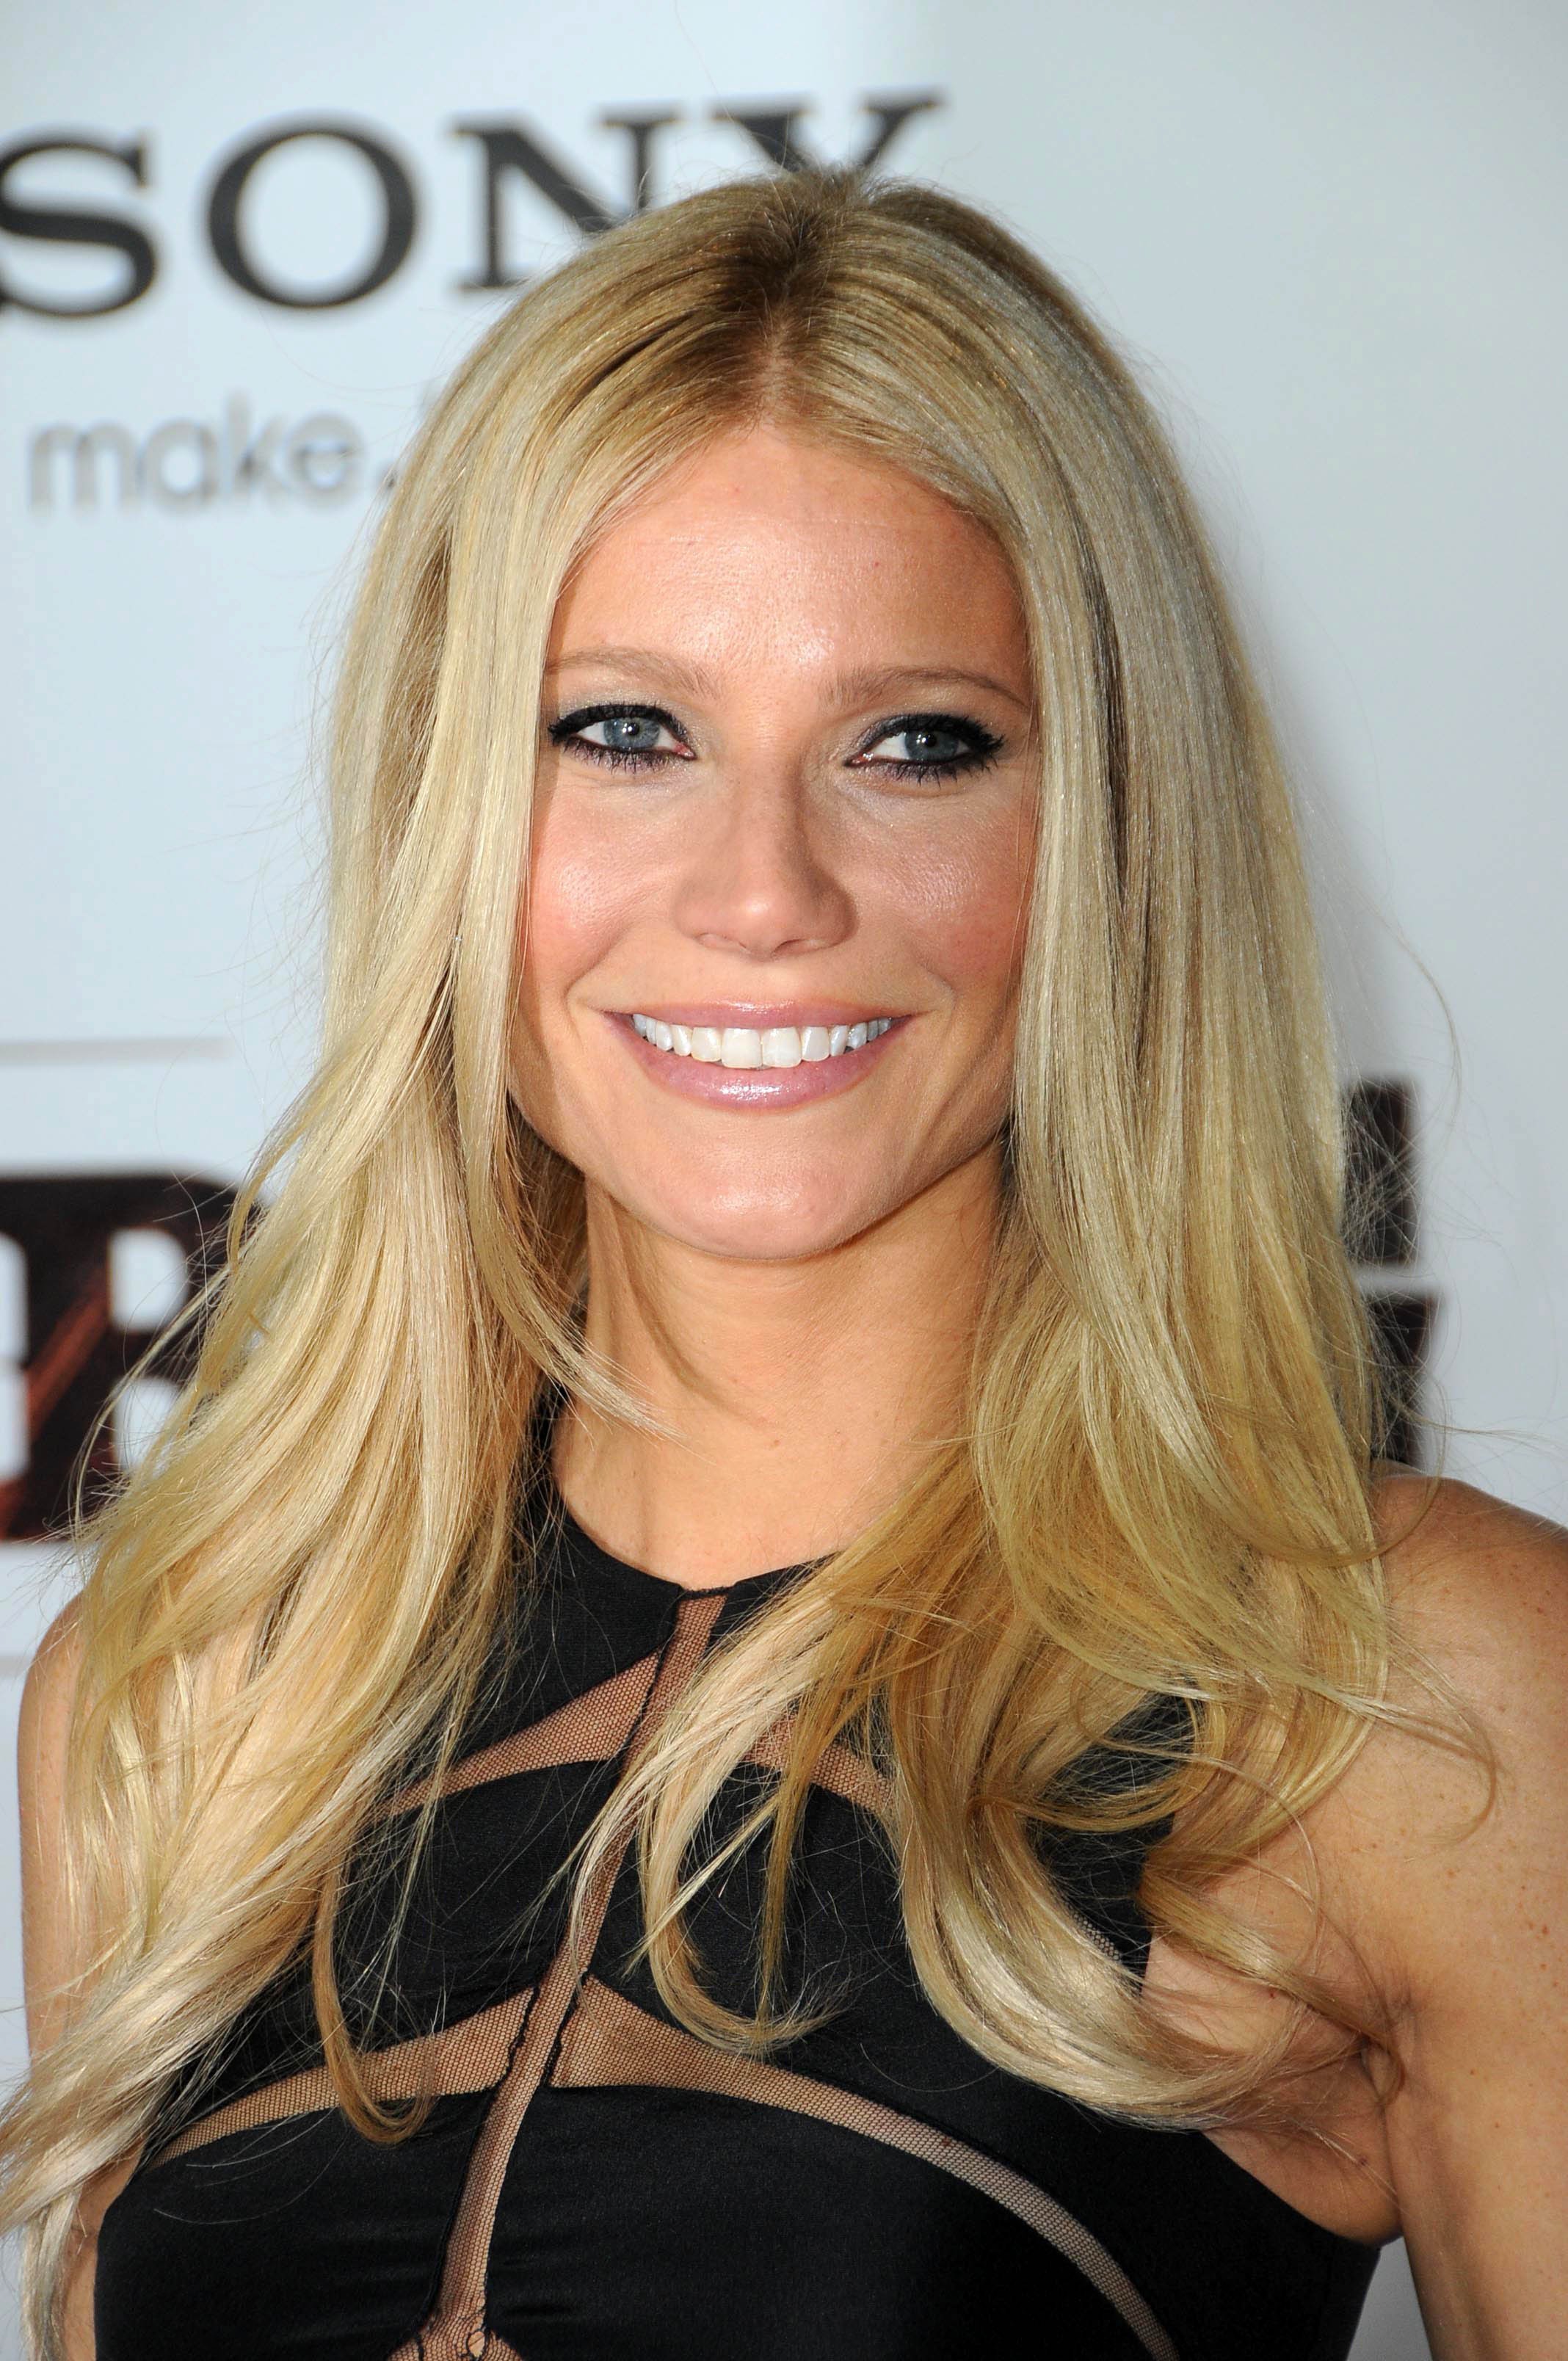 Source: Shutterstock / Gwyneth Paltrow at the "Country Strong" Nashville Premiere on November 8, 2010 in Nashville, Tennessee